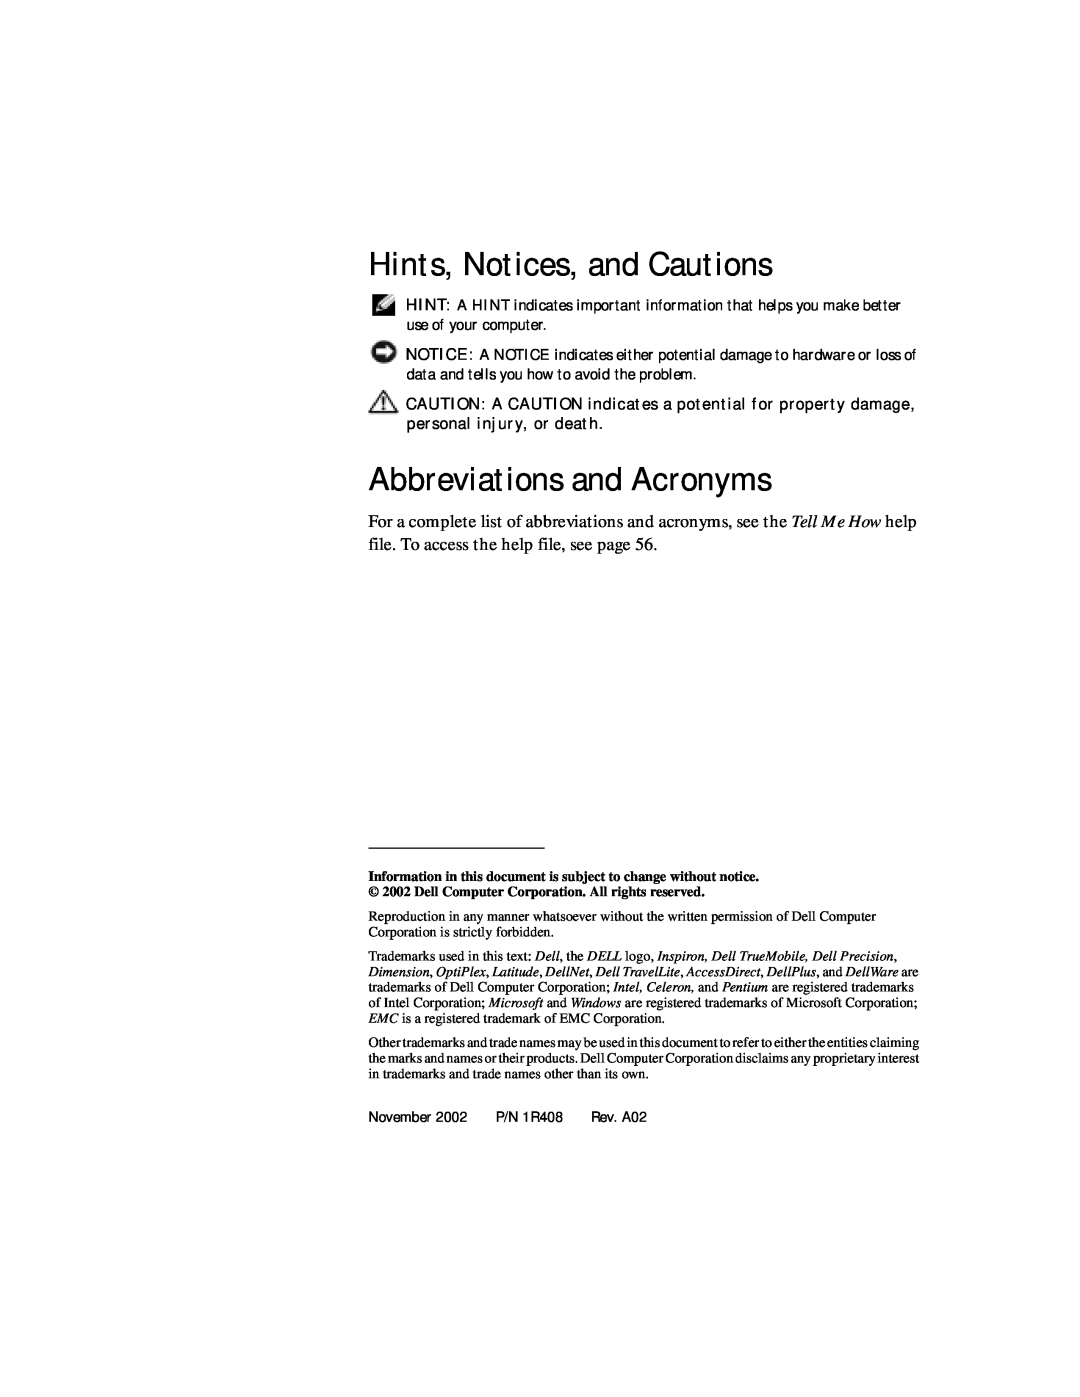 Dell 4150 owner manual Hints, Notices, and Cautions, Abbreviations and Acronyms, November, P/N 1R408 